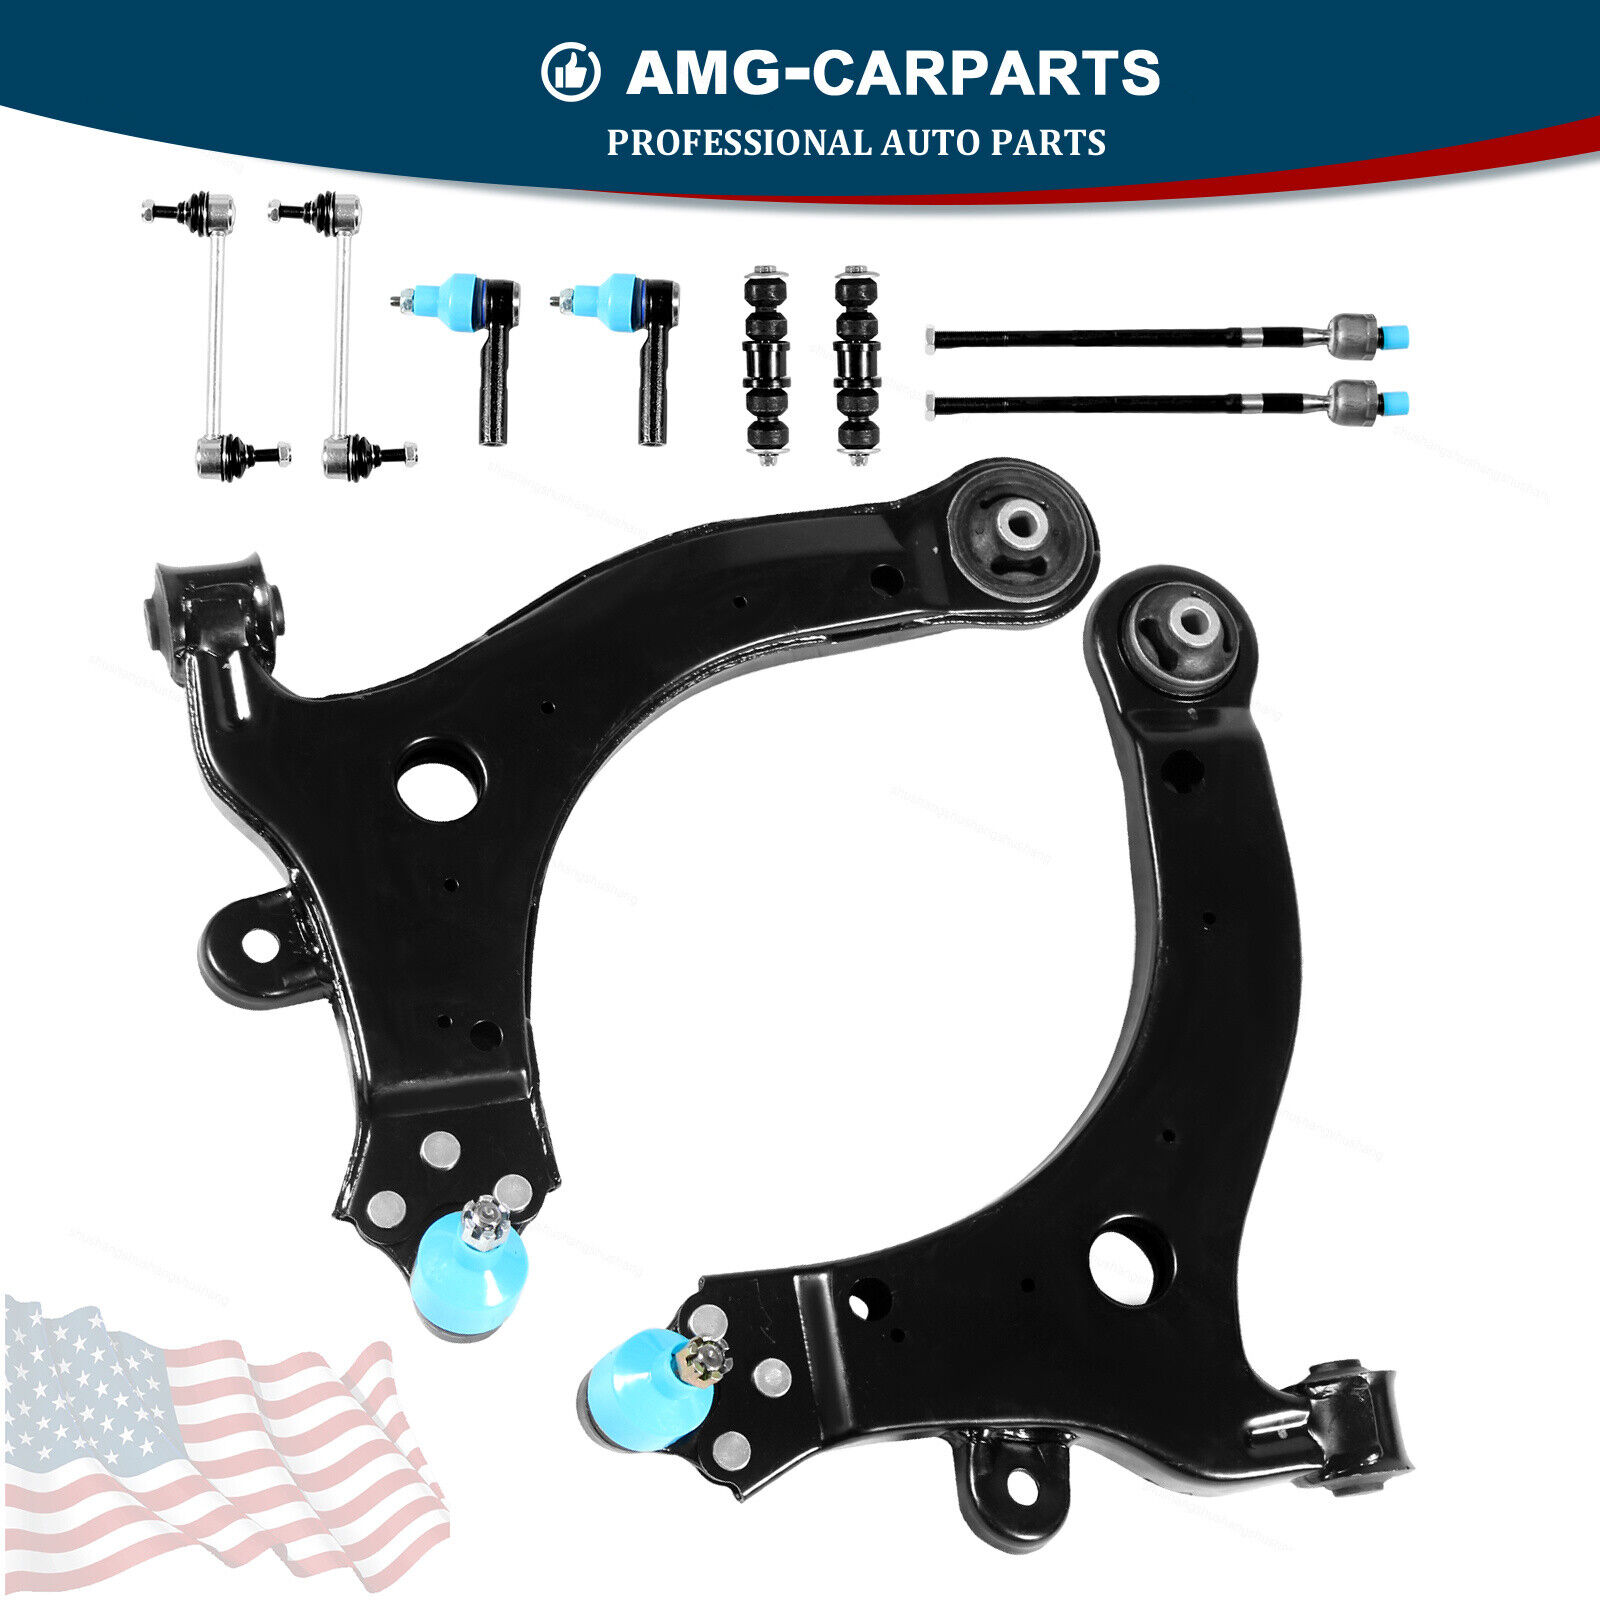 Front Lower Control Arms Fit For Buick Regal Century 2000-2016 Chevy Impala